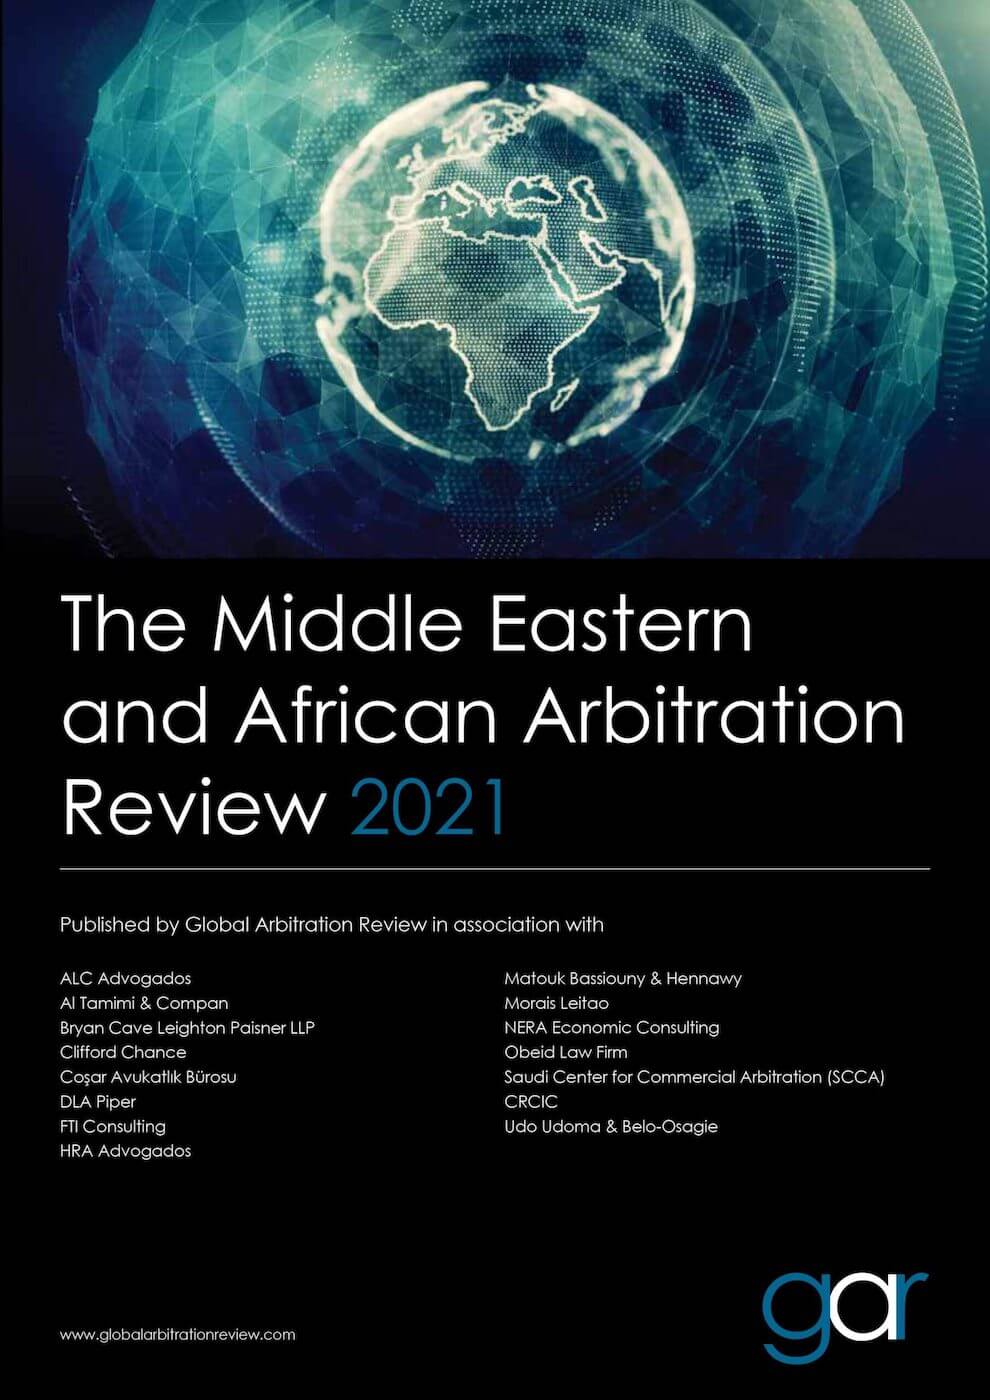 Matouk-Bassiouny-MBHs-Contribution-at-the-GARs-Middle-Eastern-and-African-Arbitration-Review-1-scaled